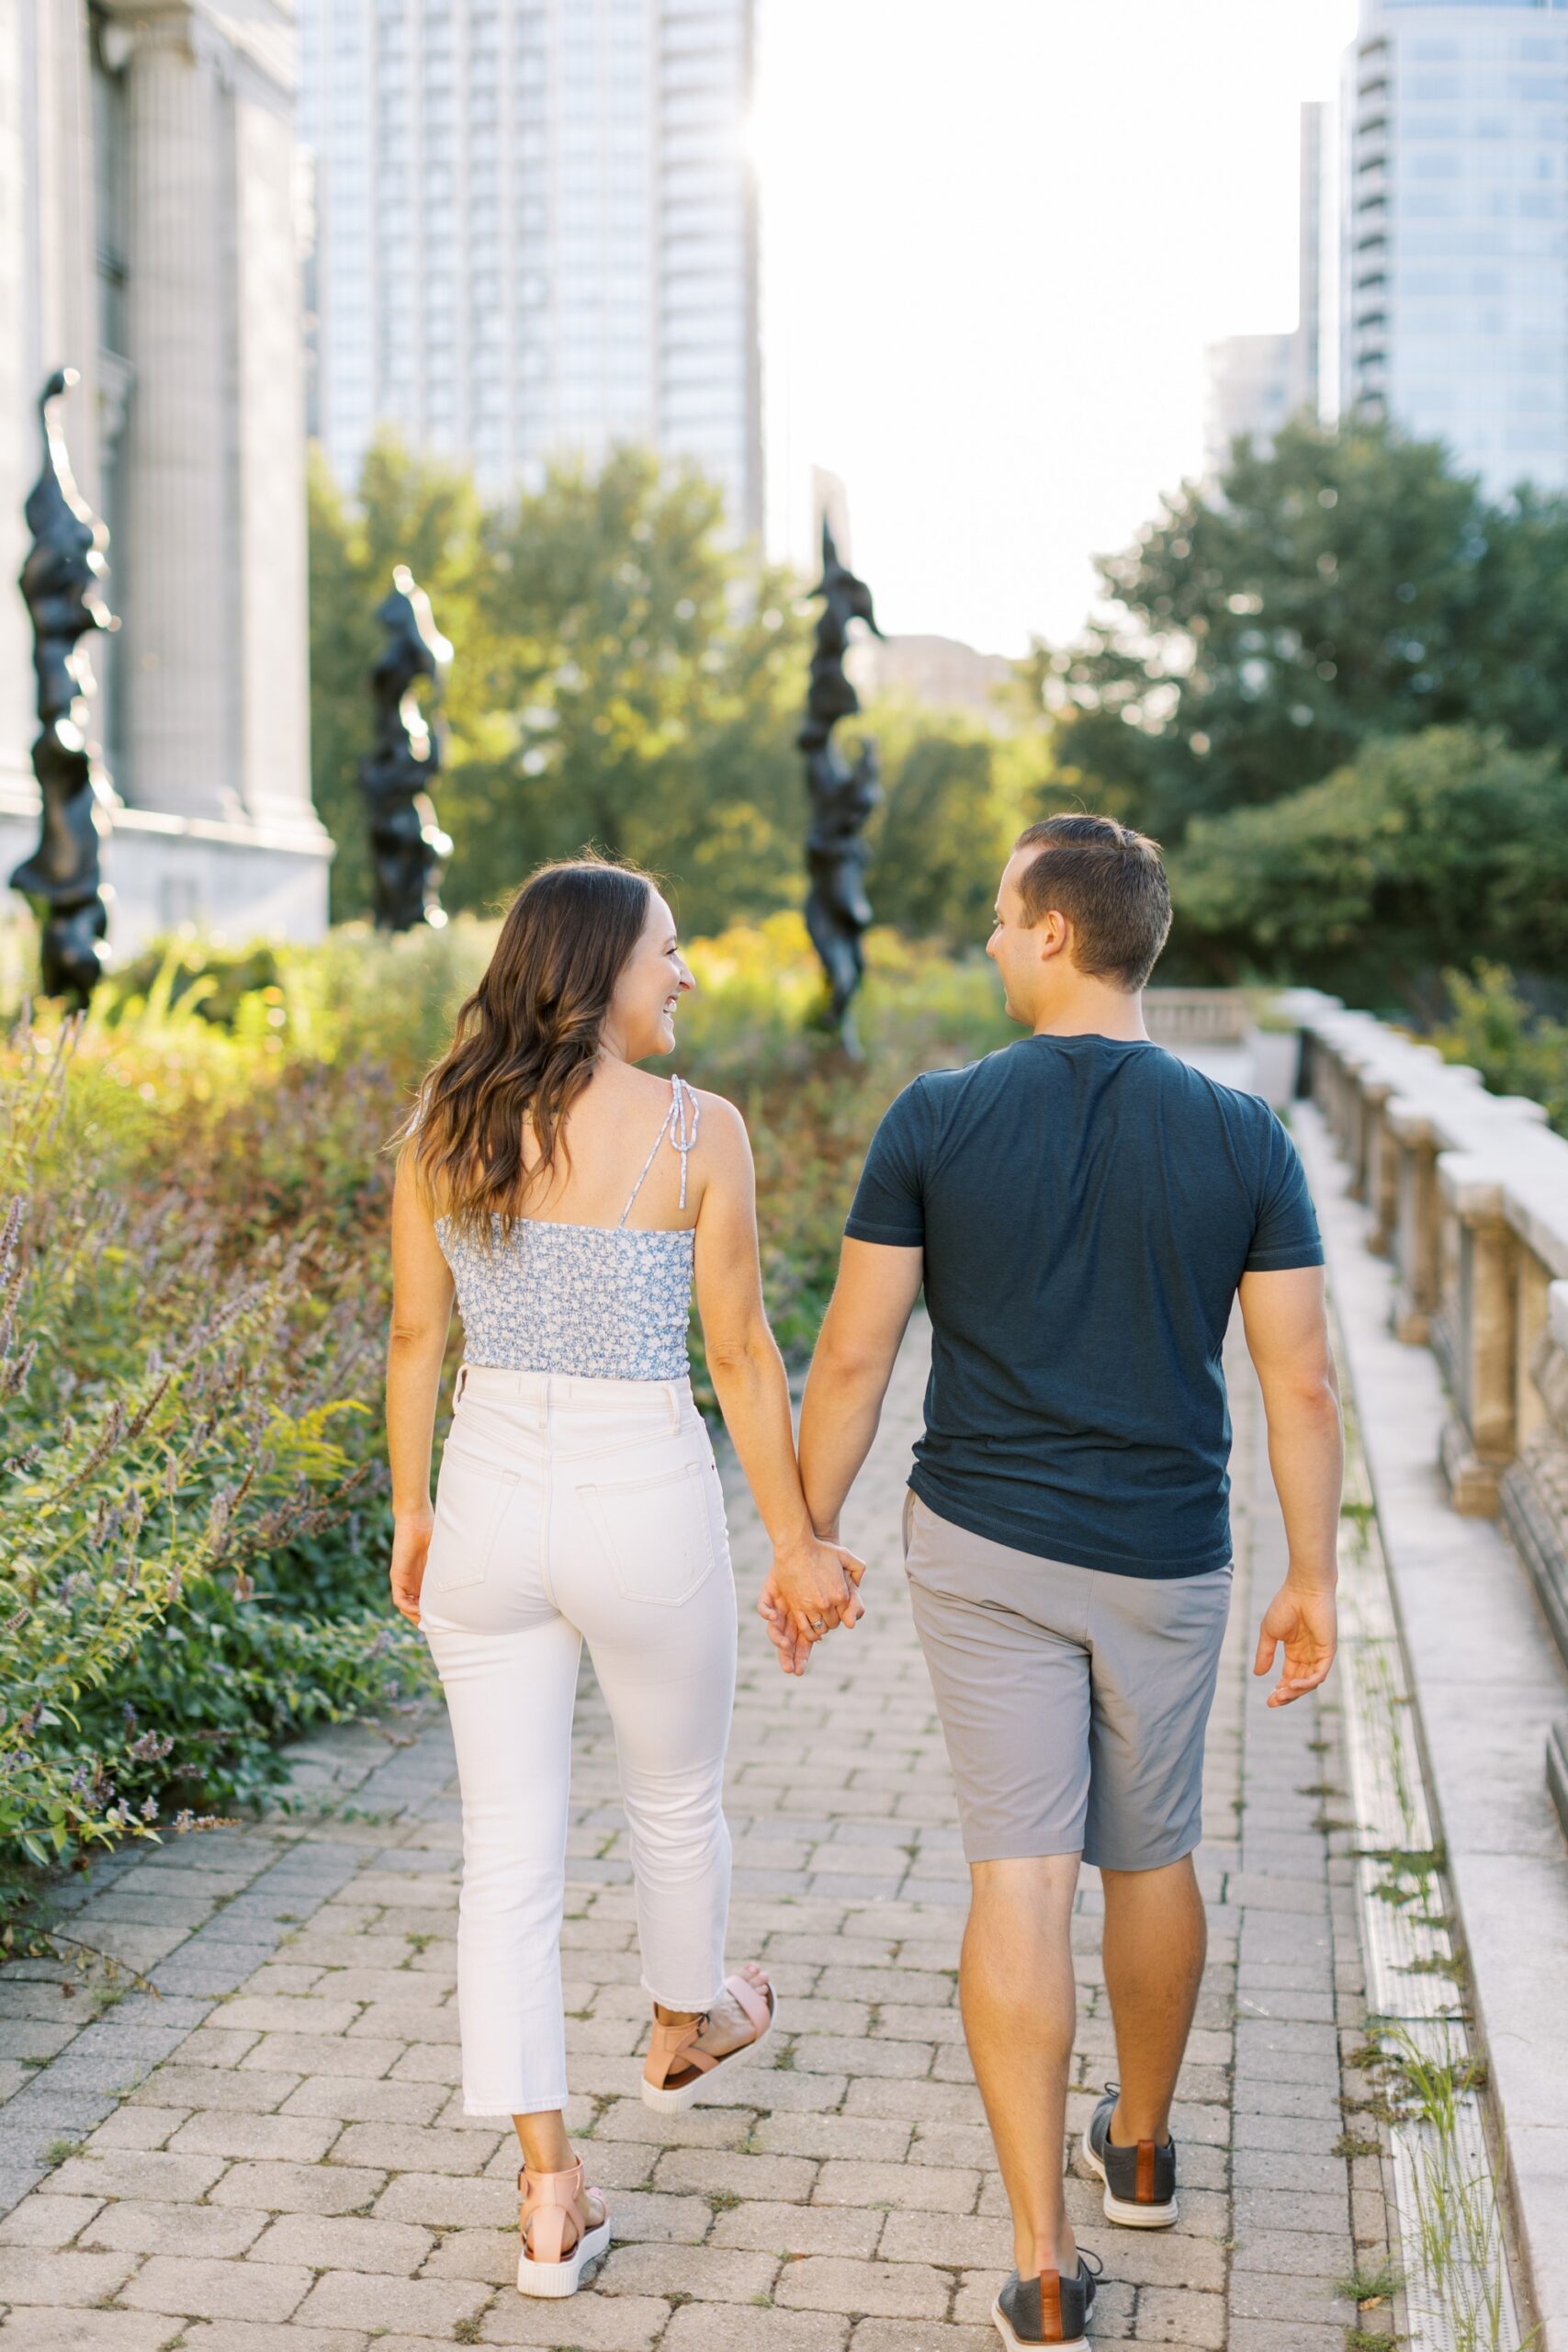 The couple held hands during their Chicago Museum Campus engagement photoshoot